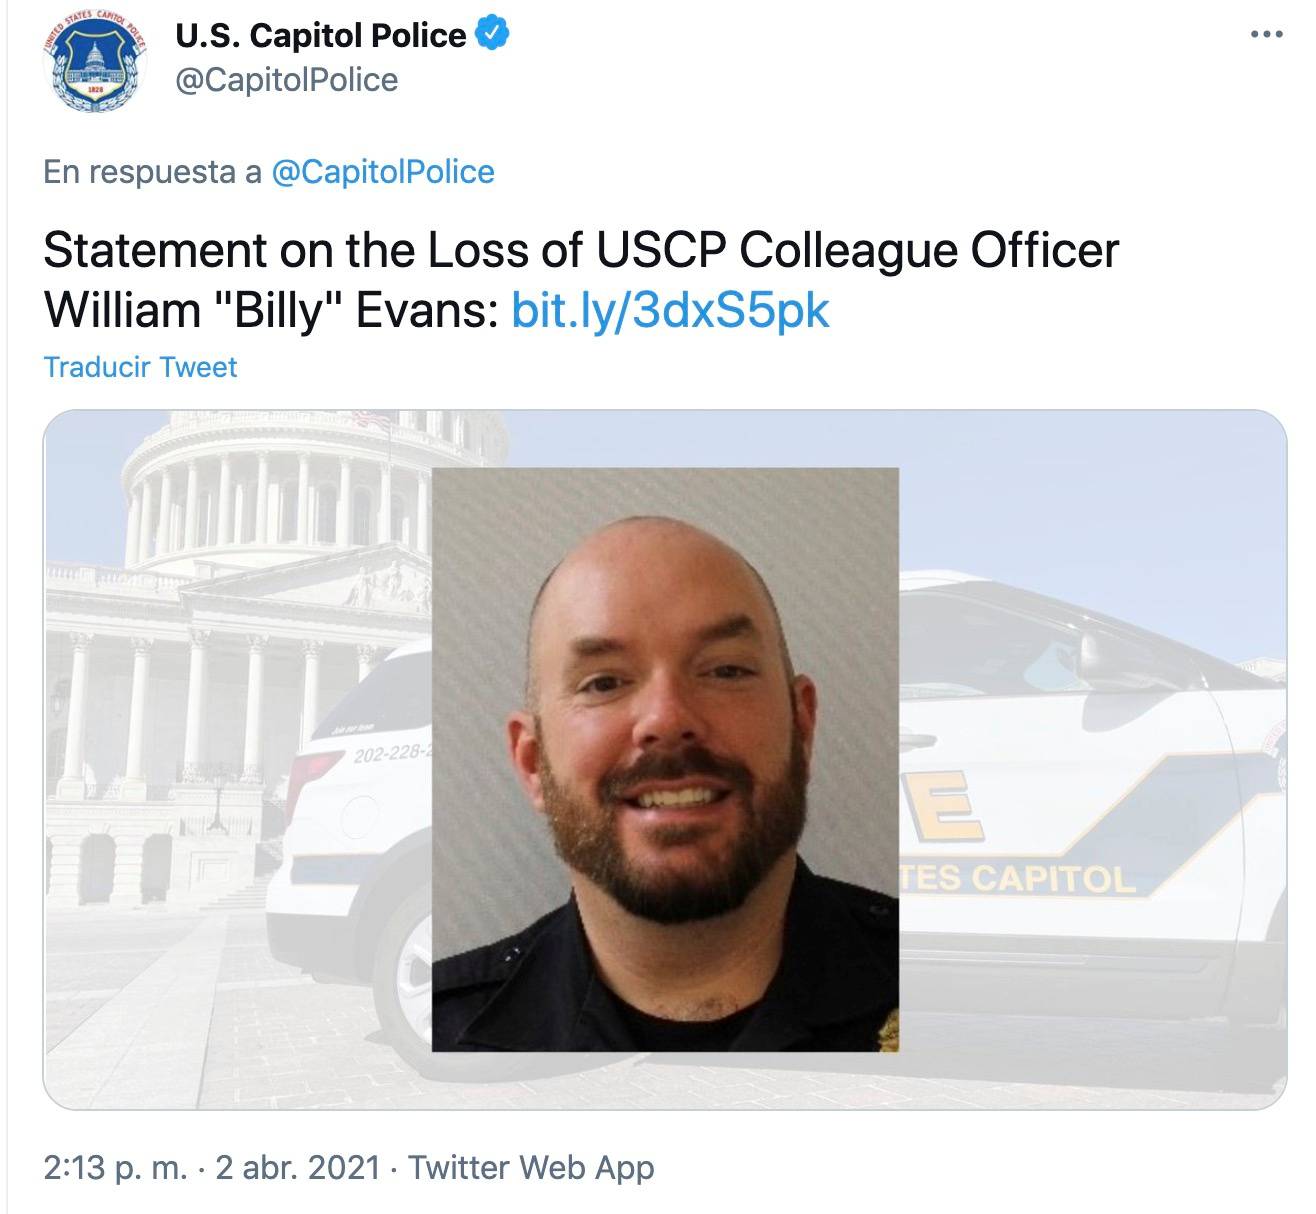 A screen shot shows a picture of USCP Colleague Officer William "Billy" Evans, who was killed in a violent incident near the Capitol